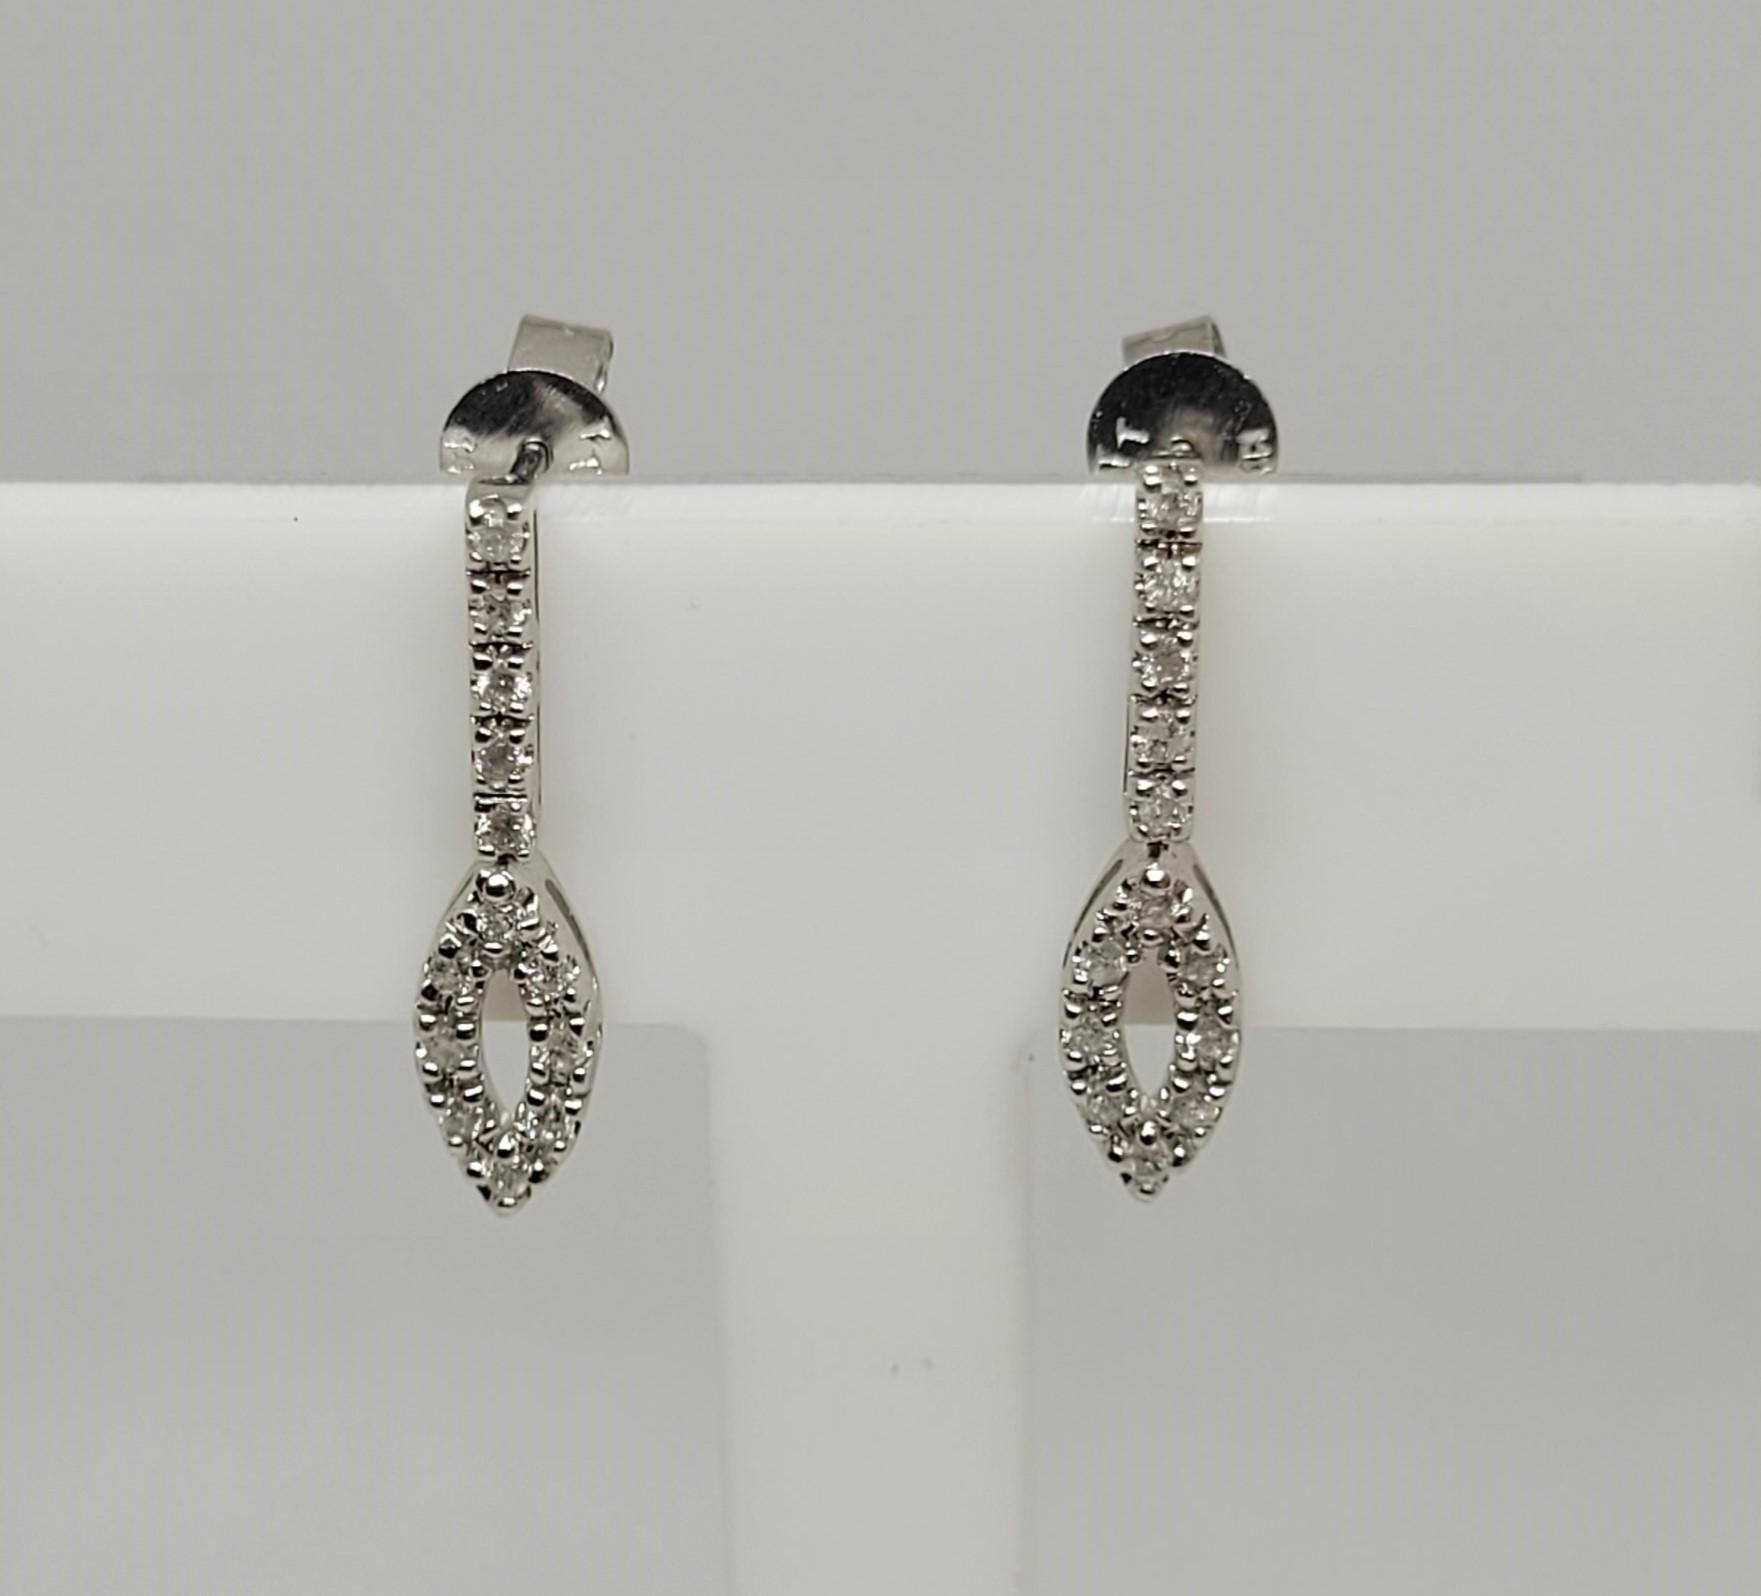 Elegant 14kt white gold earrings with 26 diamonds of approximately .26cttw; the diamonds are commercial-grade, G/H in color, and I clarity. The diamonds are set in a prong setting that is 1.88 grams for both earrings, stamped 858 14kt, and secured